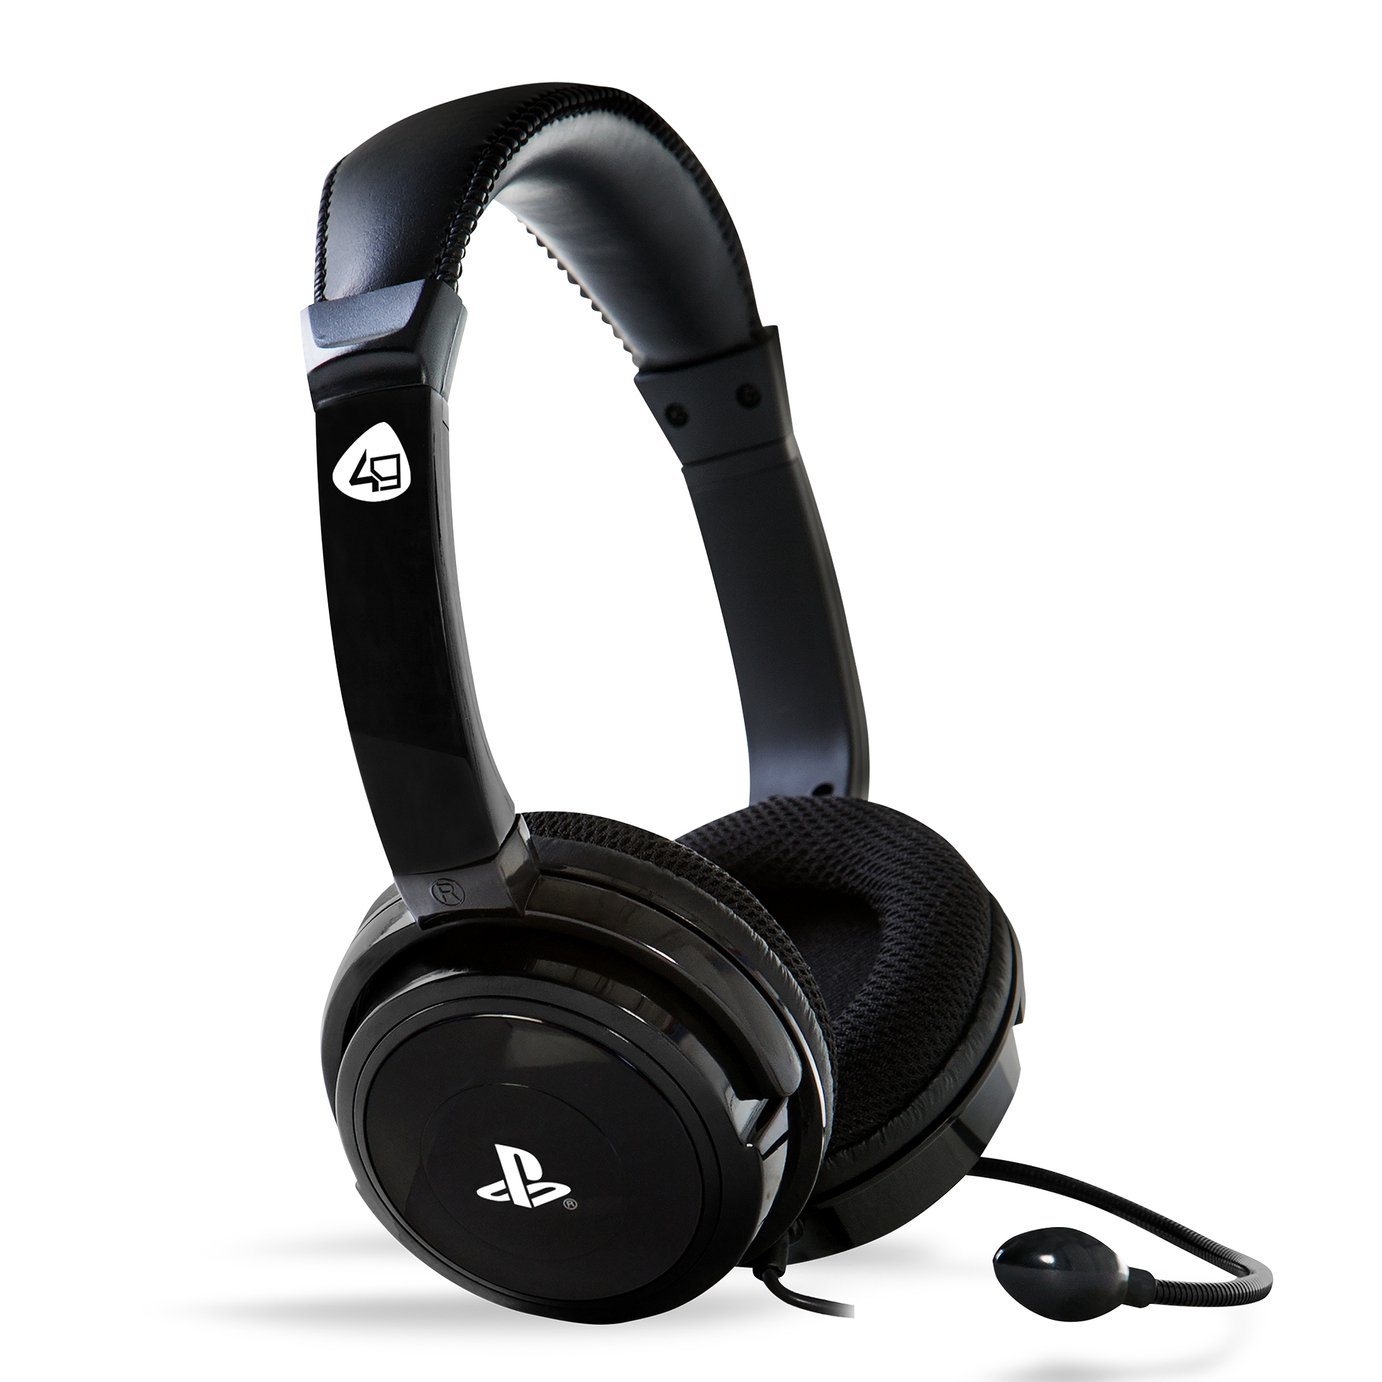 4Gamers PRO4-40 PS4 Headset - Black